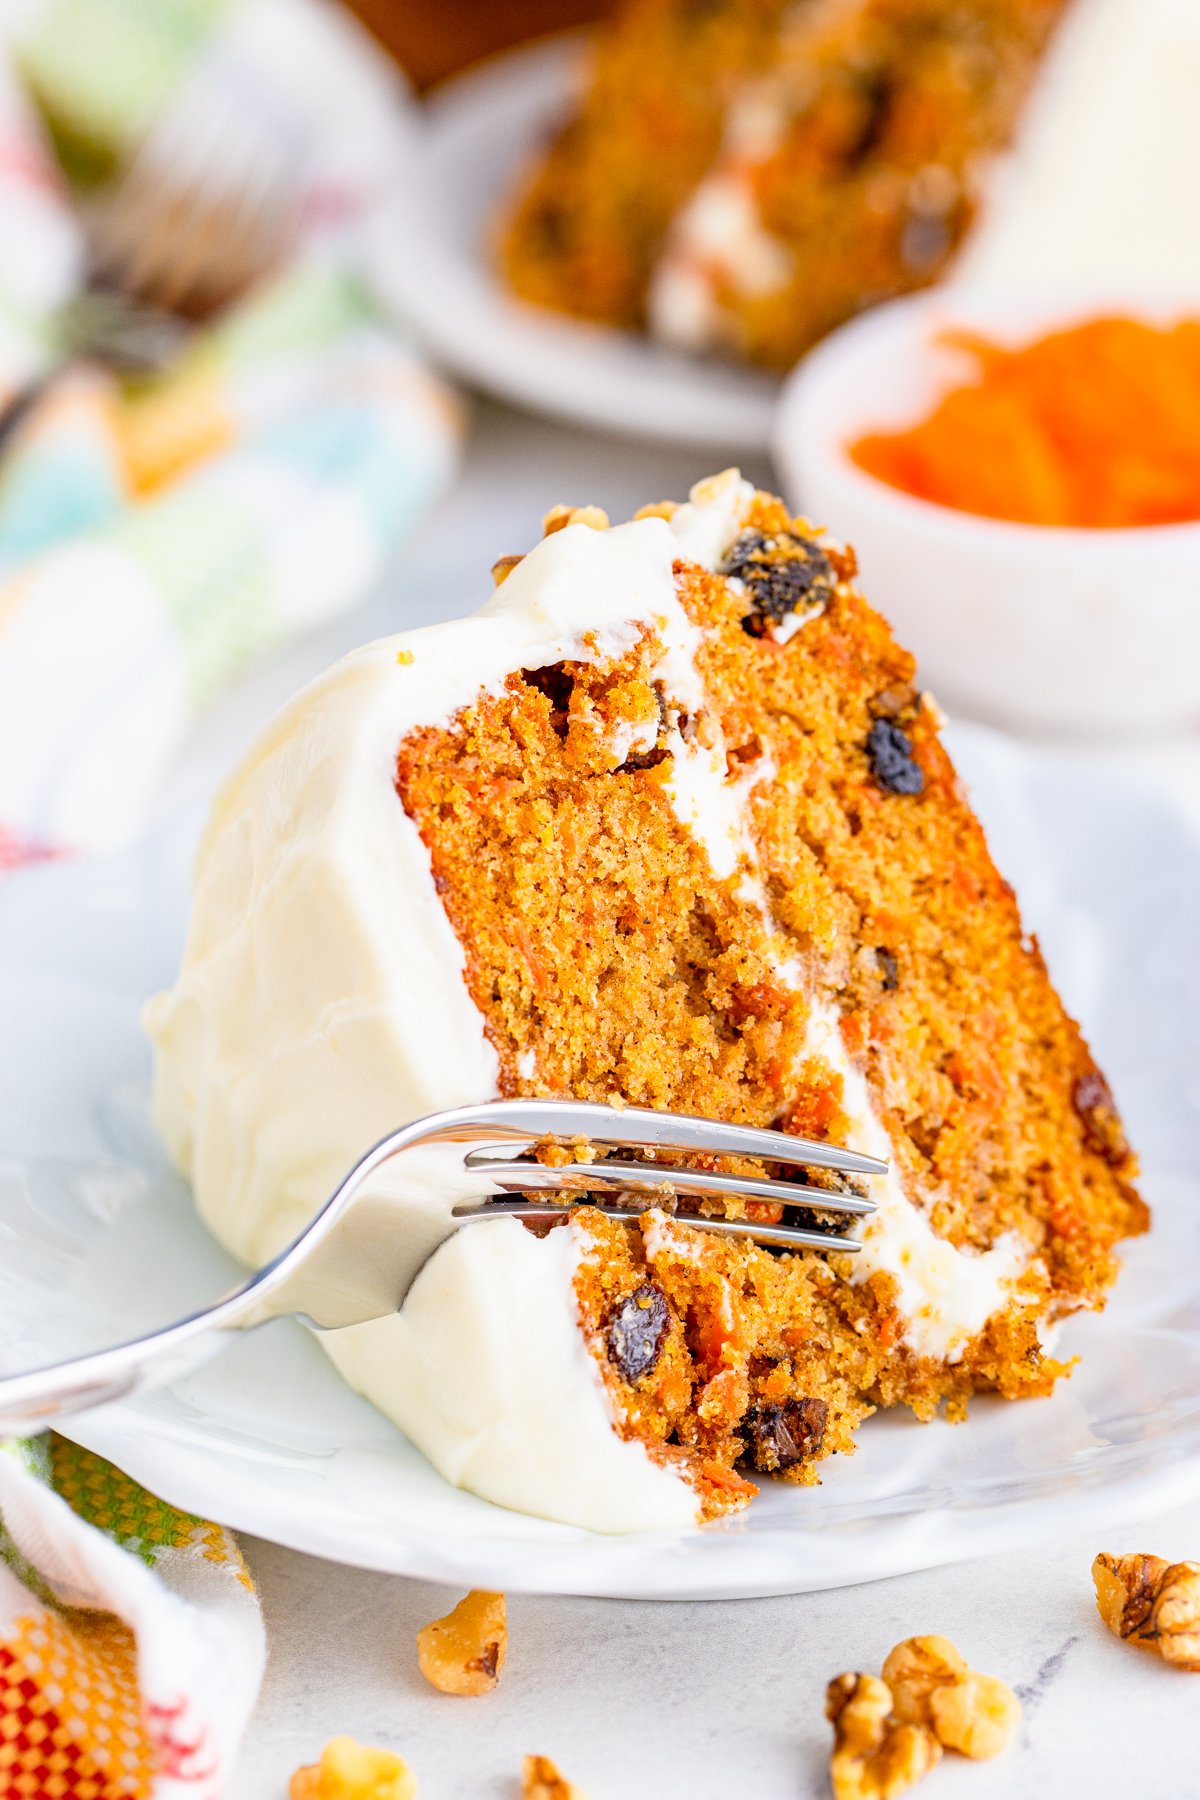 Fork cutting into slice of Layered Carrot Cake